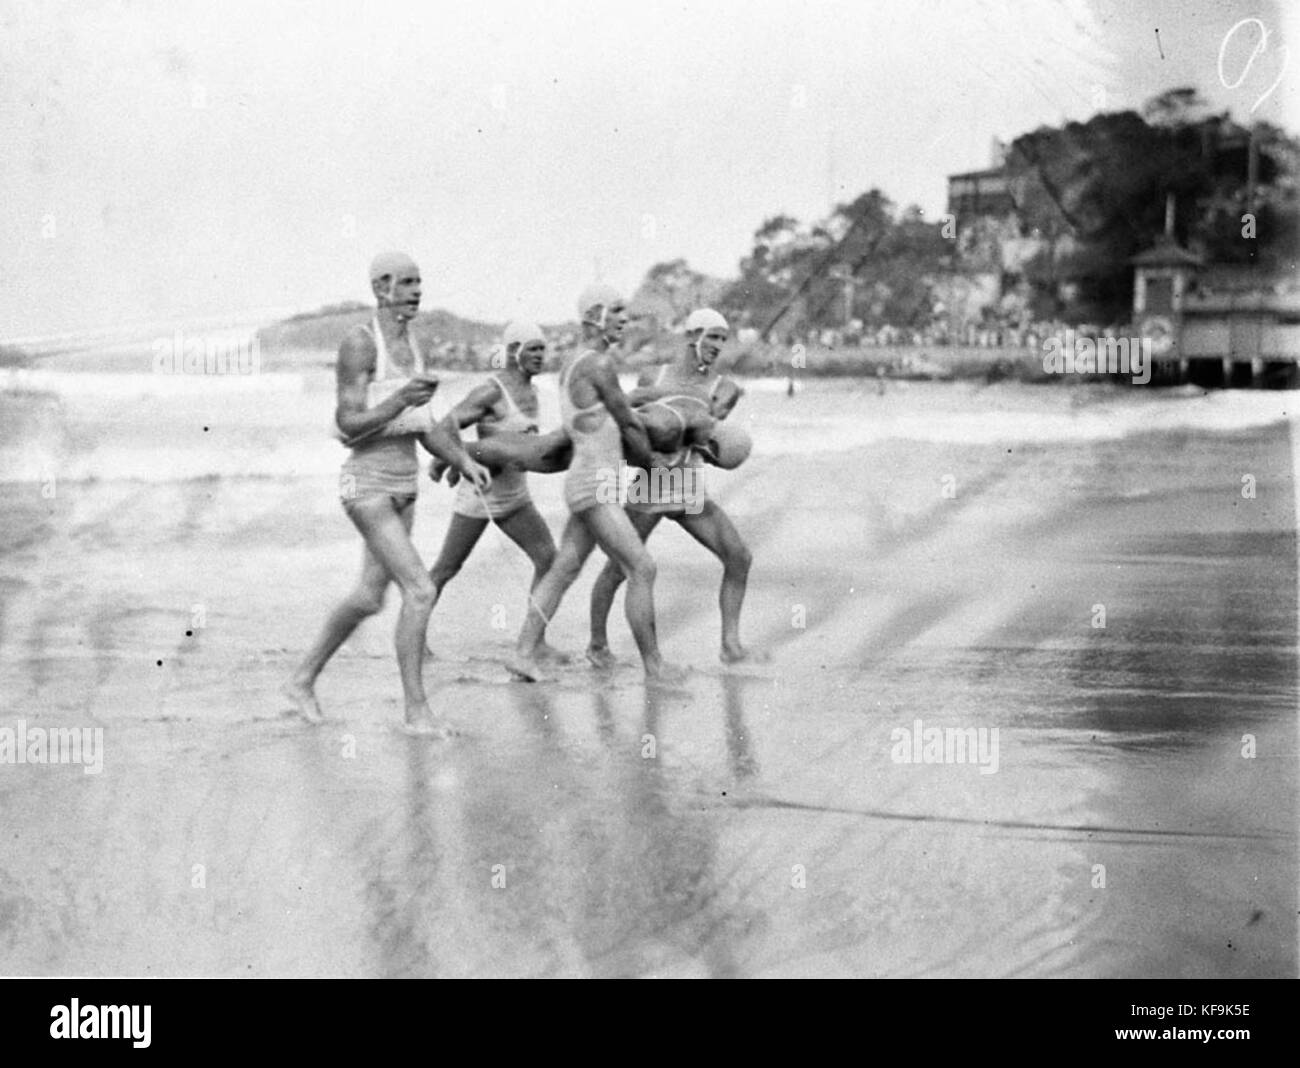 10246 Surf life saving R and R team at a carnival Manly Stock Photo